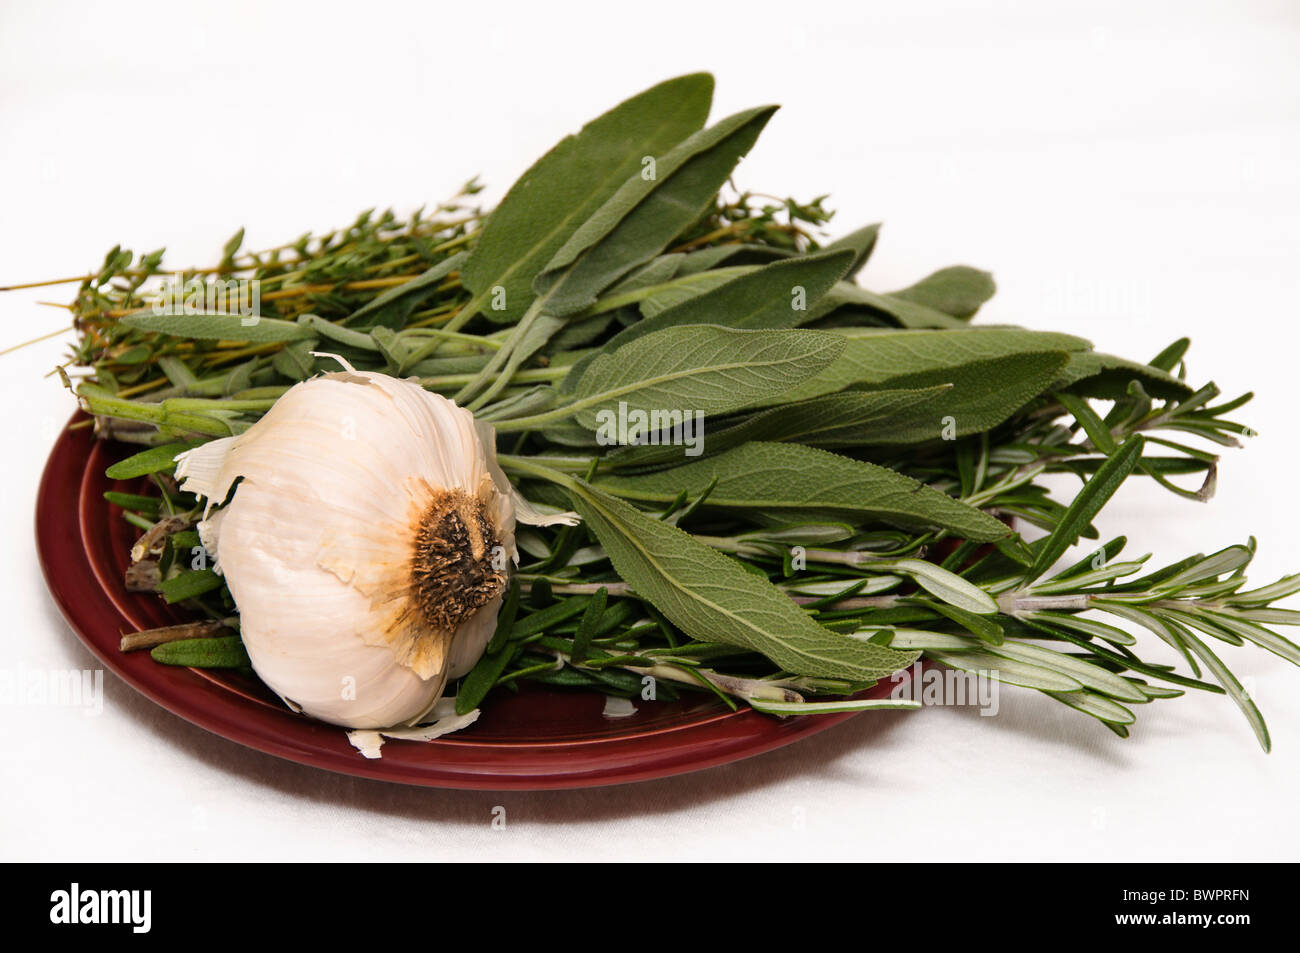 Sage, rosemary, thyme and garlic are ready to use to flavor the main course. Stock Photo